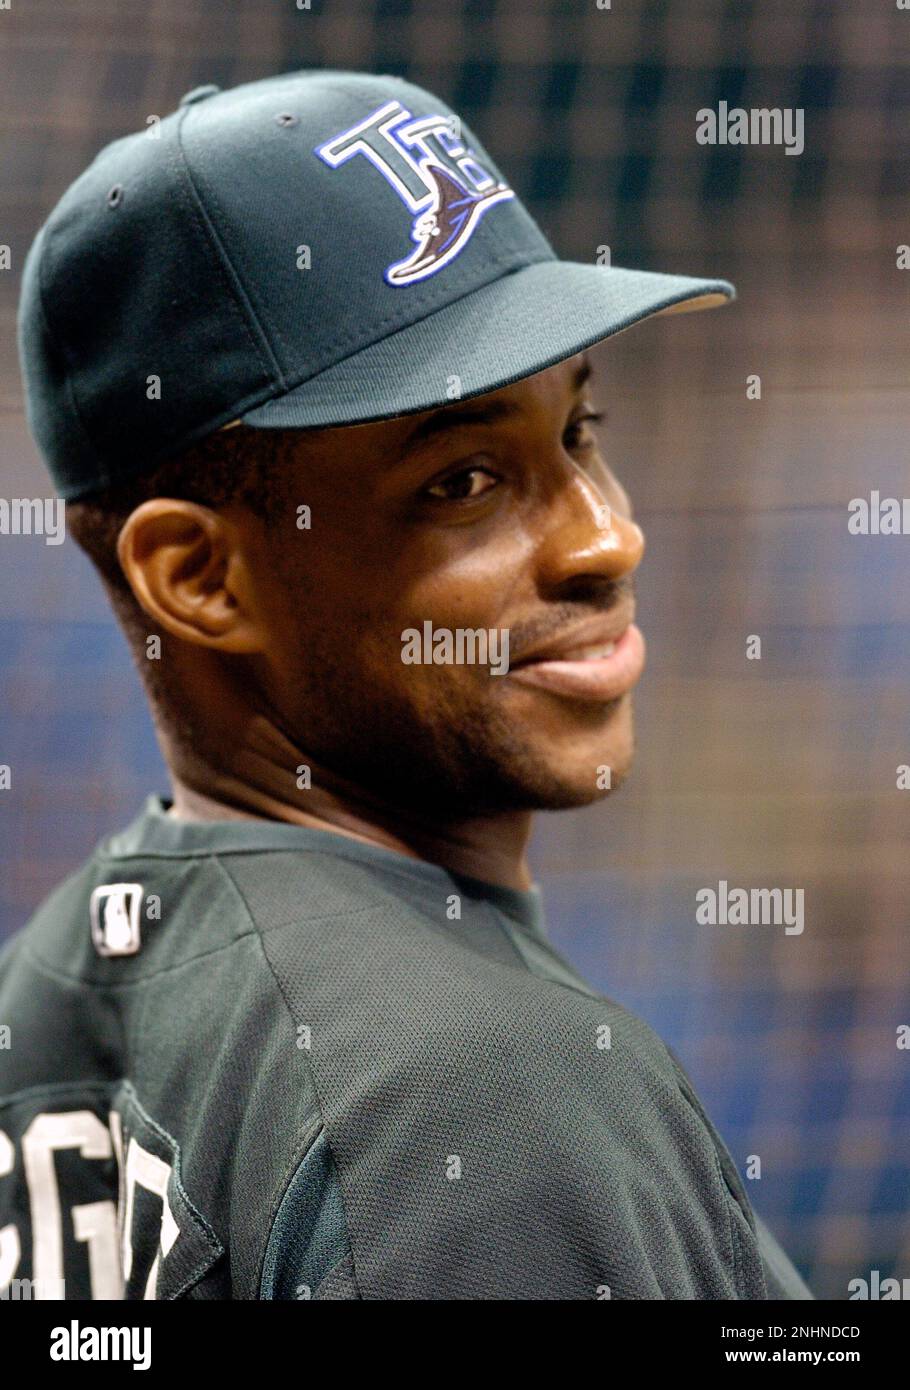 Tampa Bay Rays infielder Fred McGriff sets for play in an MLB game